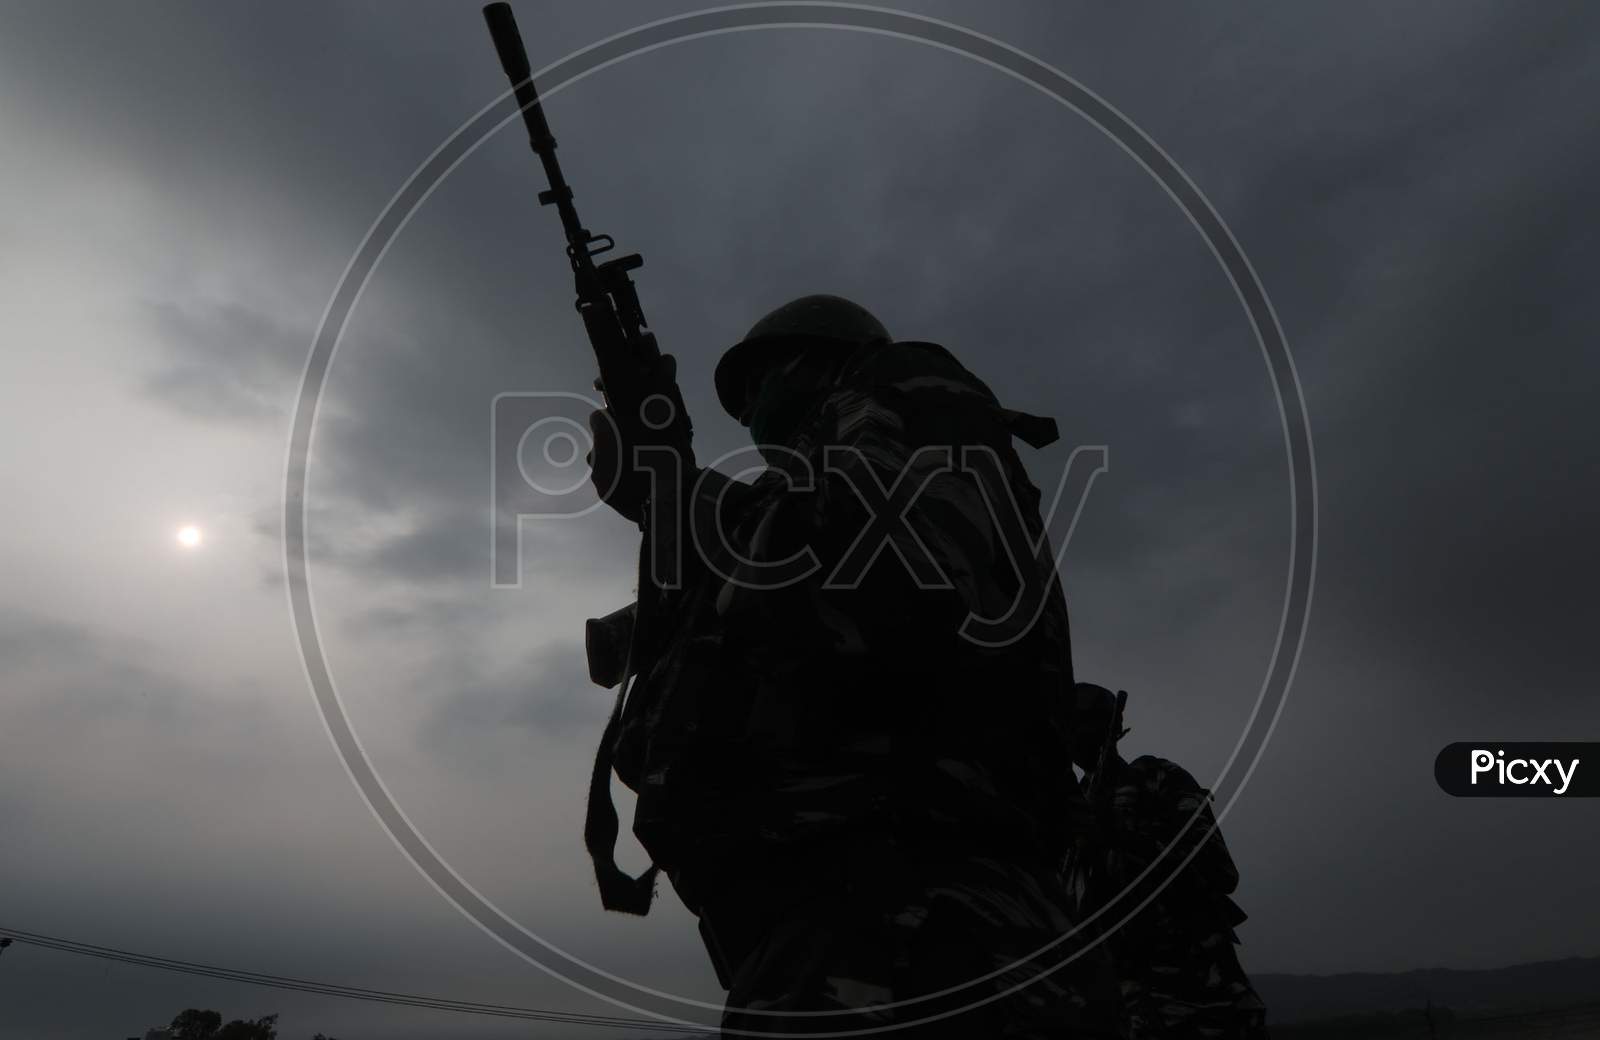 Soldiers belonging to the Central Reserve Police Force unit stand guard on the Jammu & Kashmir National Highway ahead of the start of the Amarnath Yatra in Jammu on July 19, 2020